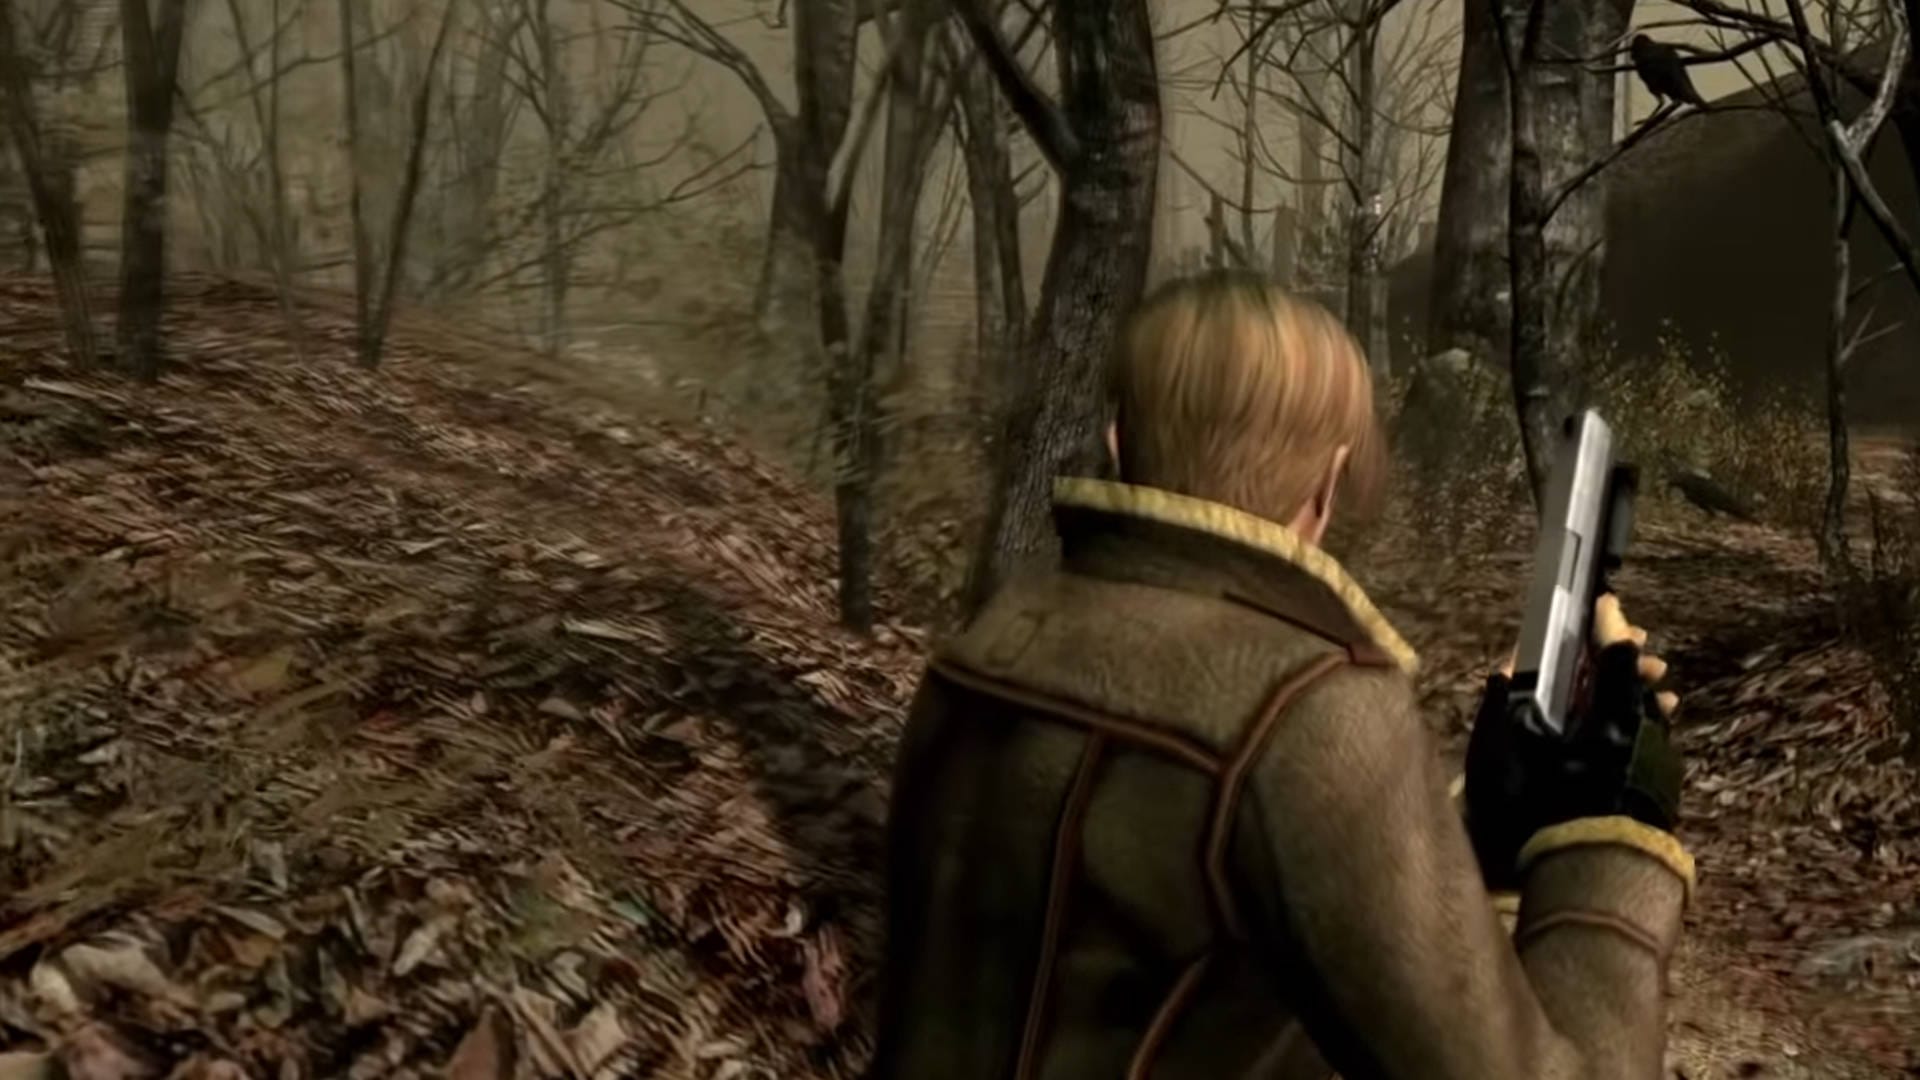 Resident Evil 4 remake announced, coming 2023 - Polygon